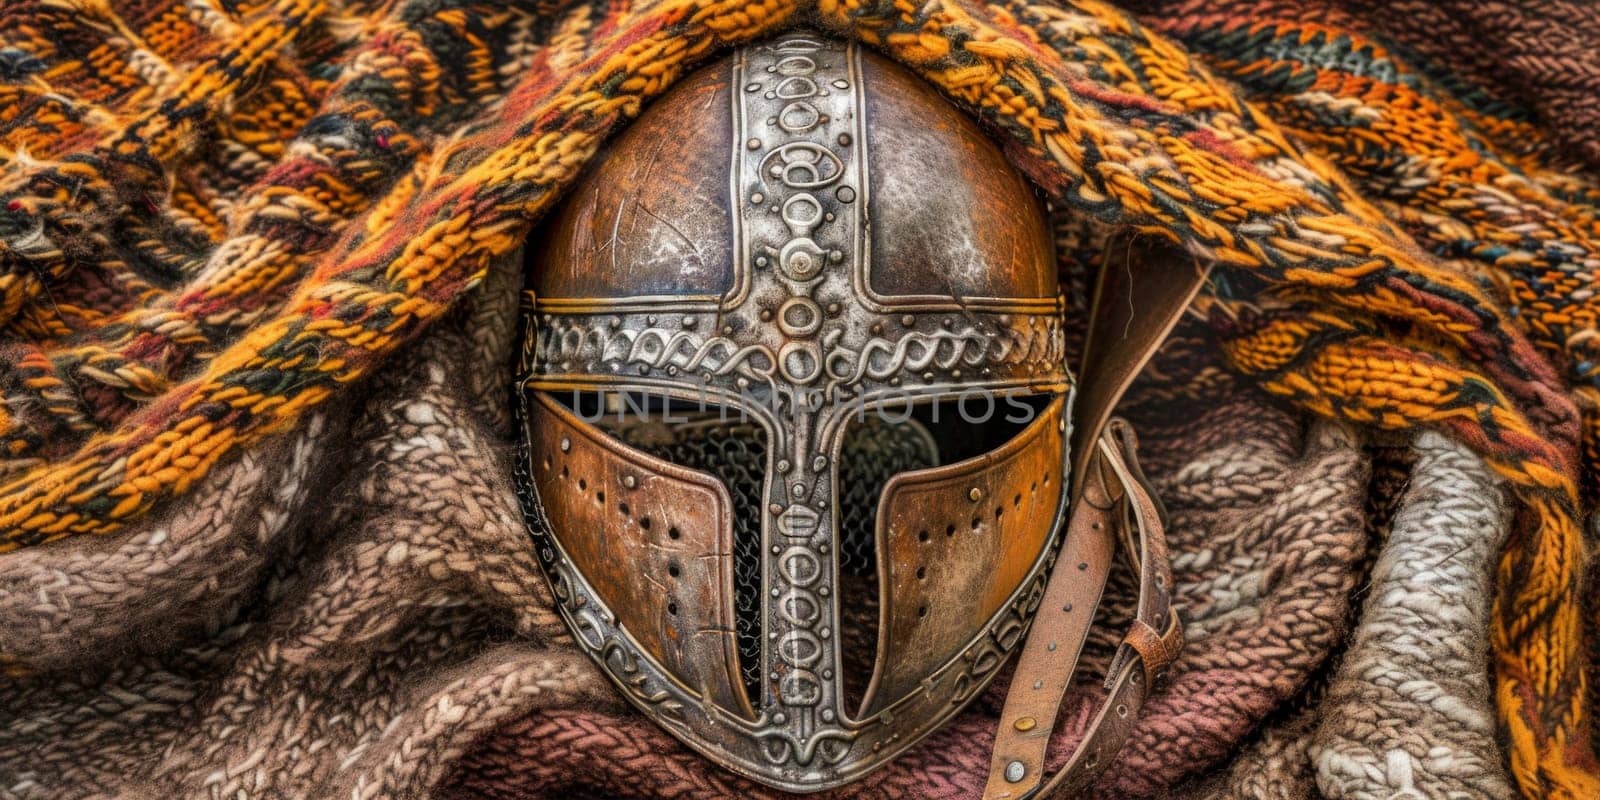 A close-up view of a helmet peacefully laid upon a soft, textured blanket by but_photo